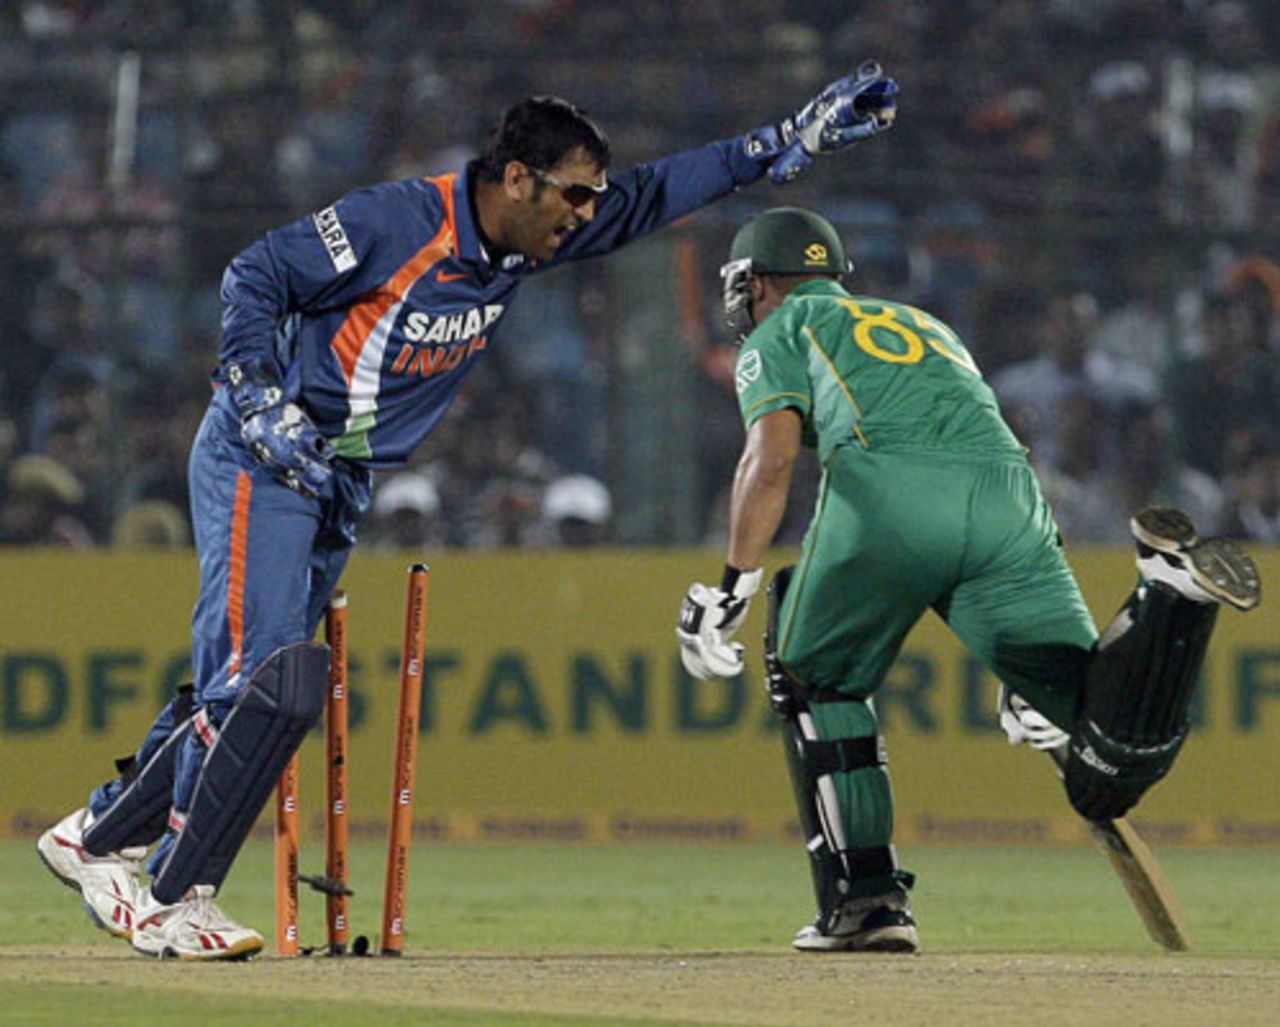 MS Dhoni catches Alviro Petersen short of his ground, India v South Africa, 1st ODI, Jaipur, February 21, 2010